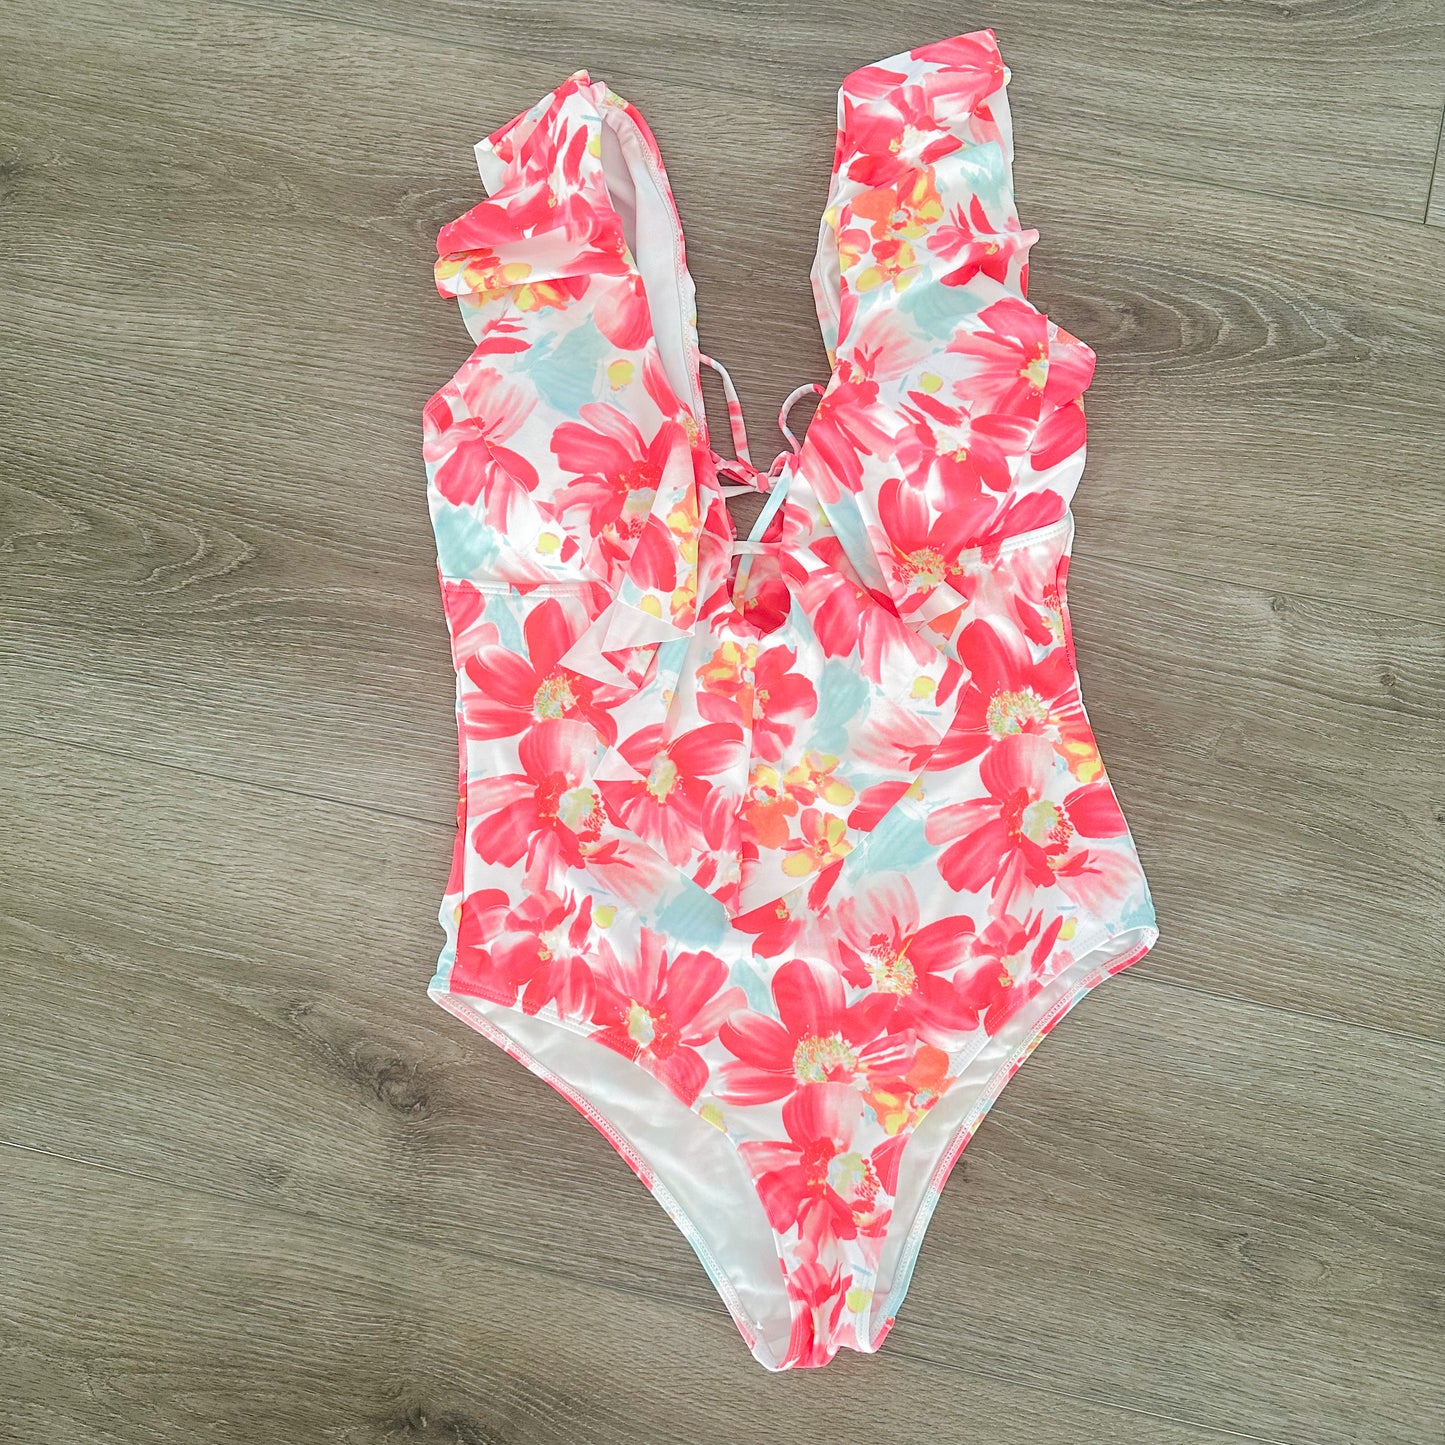 Sporlike Pink Floral Ruffle One Piece Swimsuit Size Large